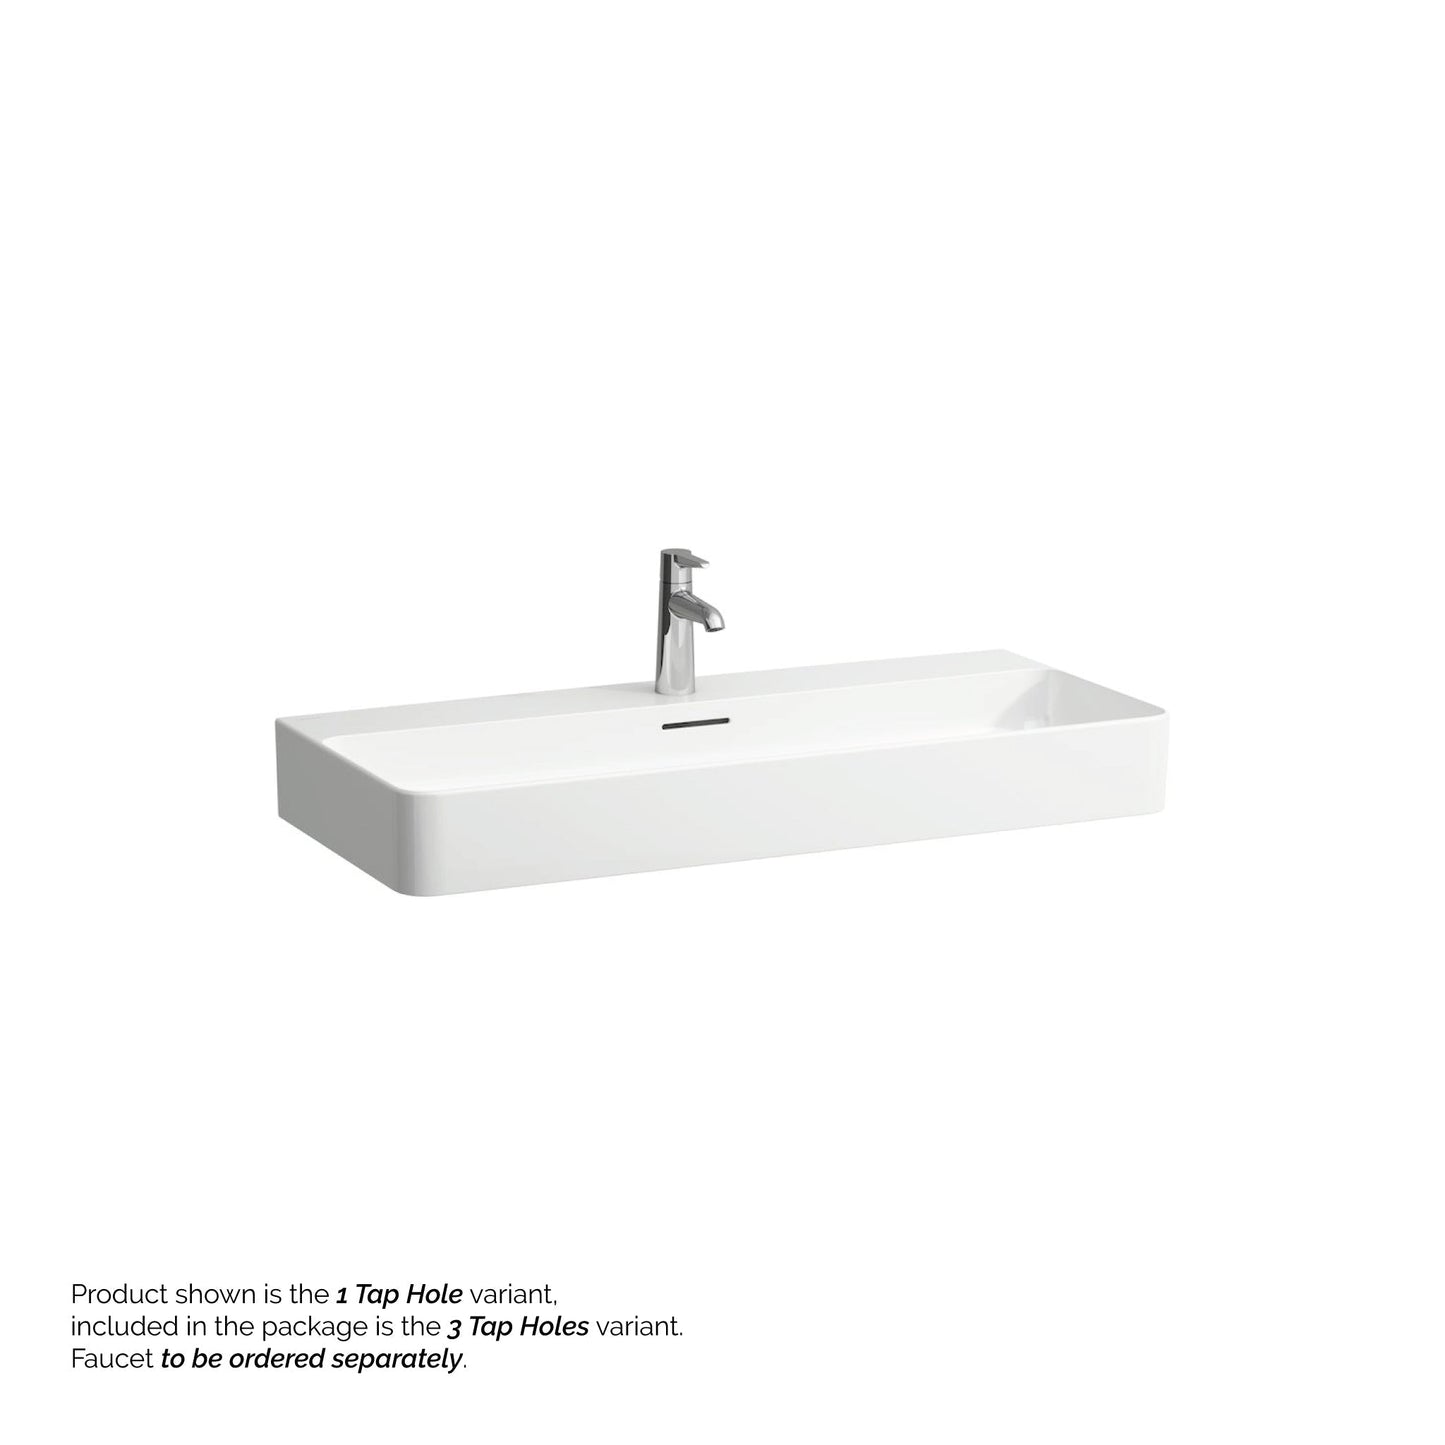 Laufen Val 37" x 17" White Ceramic Wall-Mounted Bathroom Sink With 3 Faucet Holes